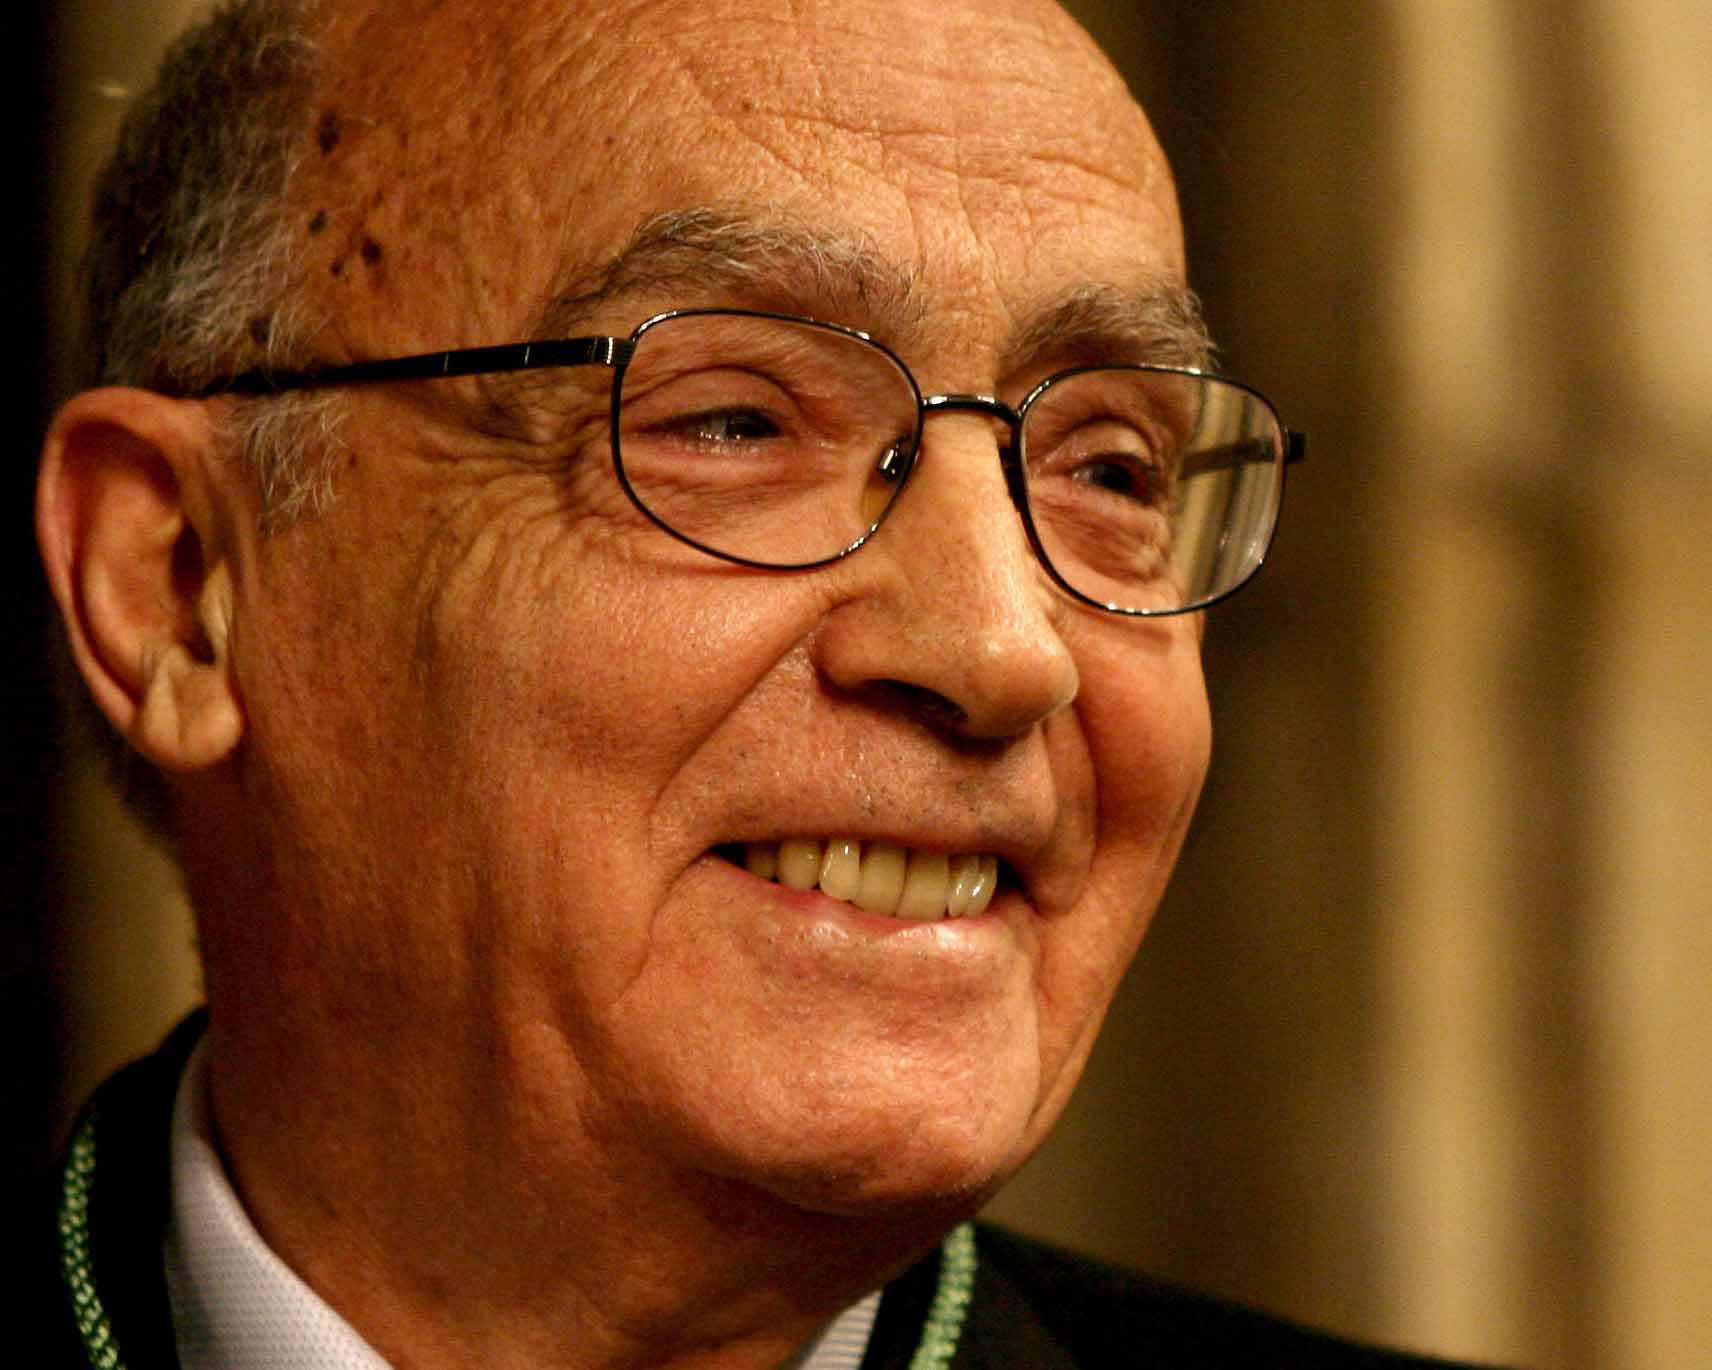 Portuguese Nobel Prize Laureate José Saramago appears during the award ceremony for the Granada Adopted Child's Medal 03 February 2006 in Granada, southern Spain. AFP PHOTO/ JOSÉ LUIS ROCA